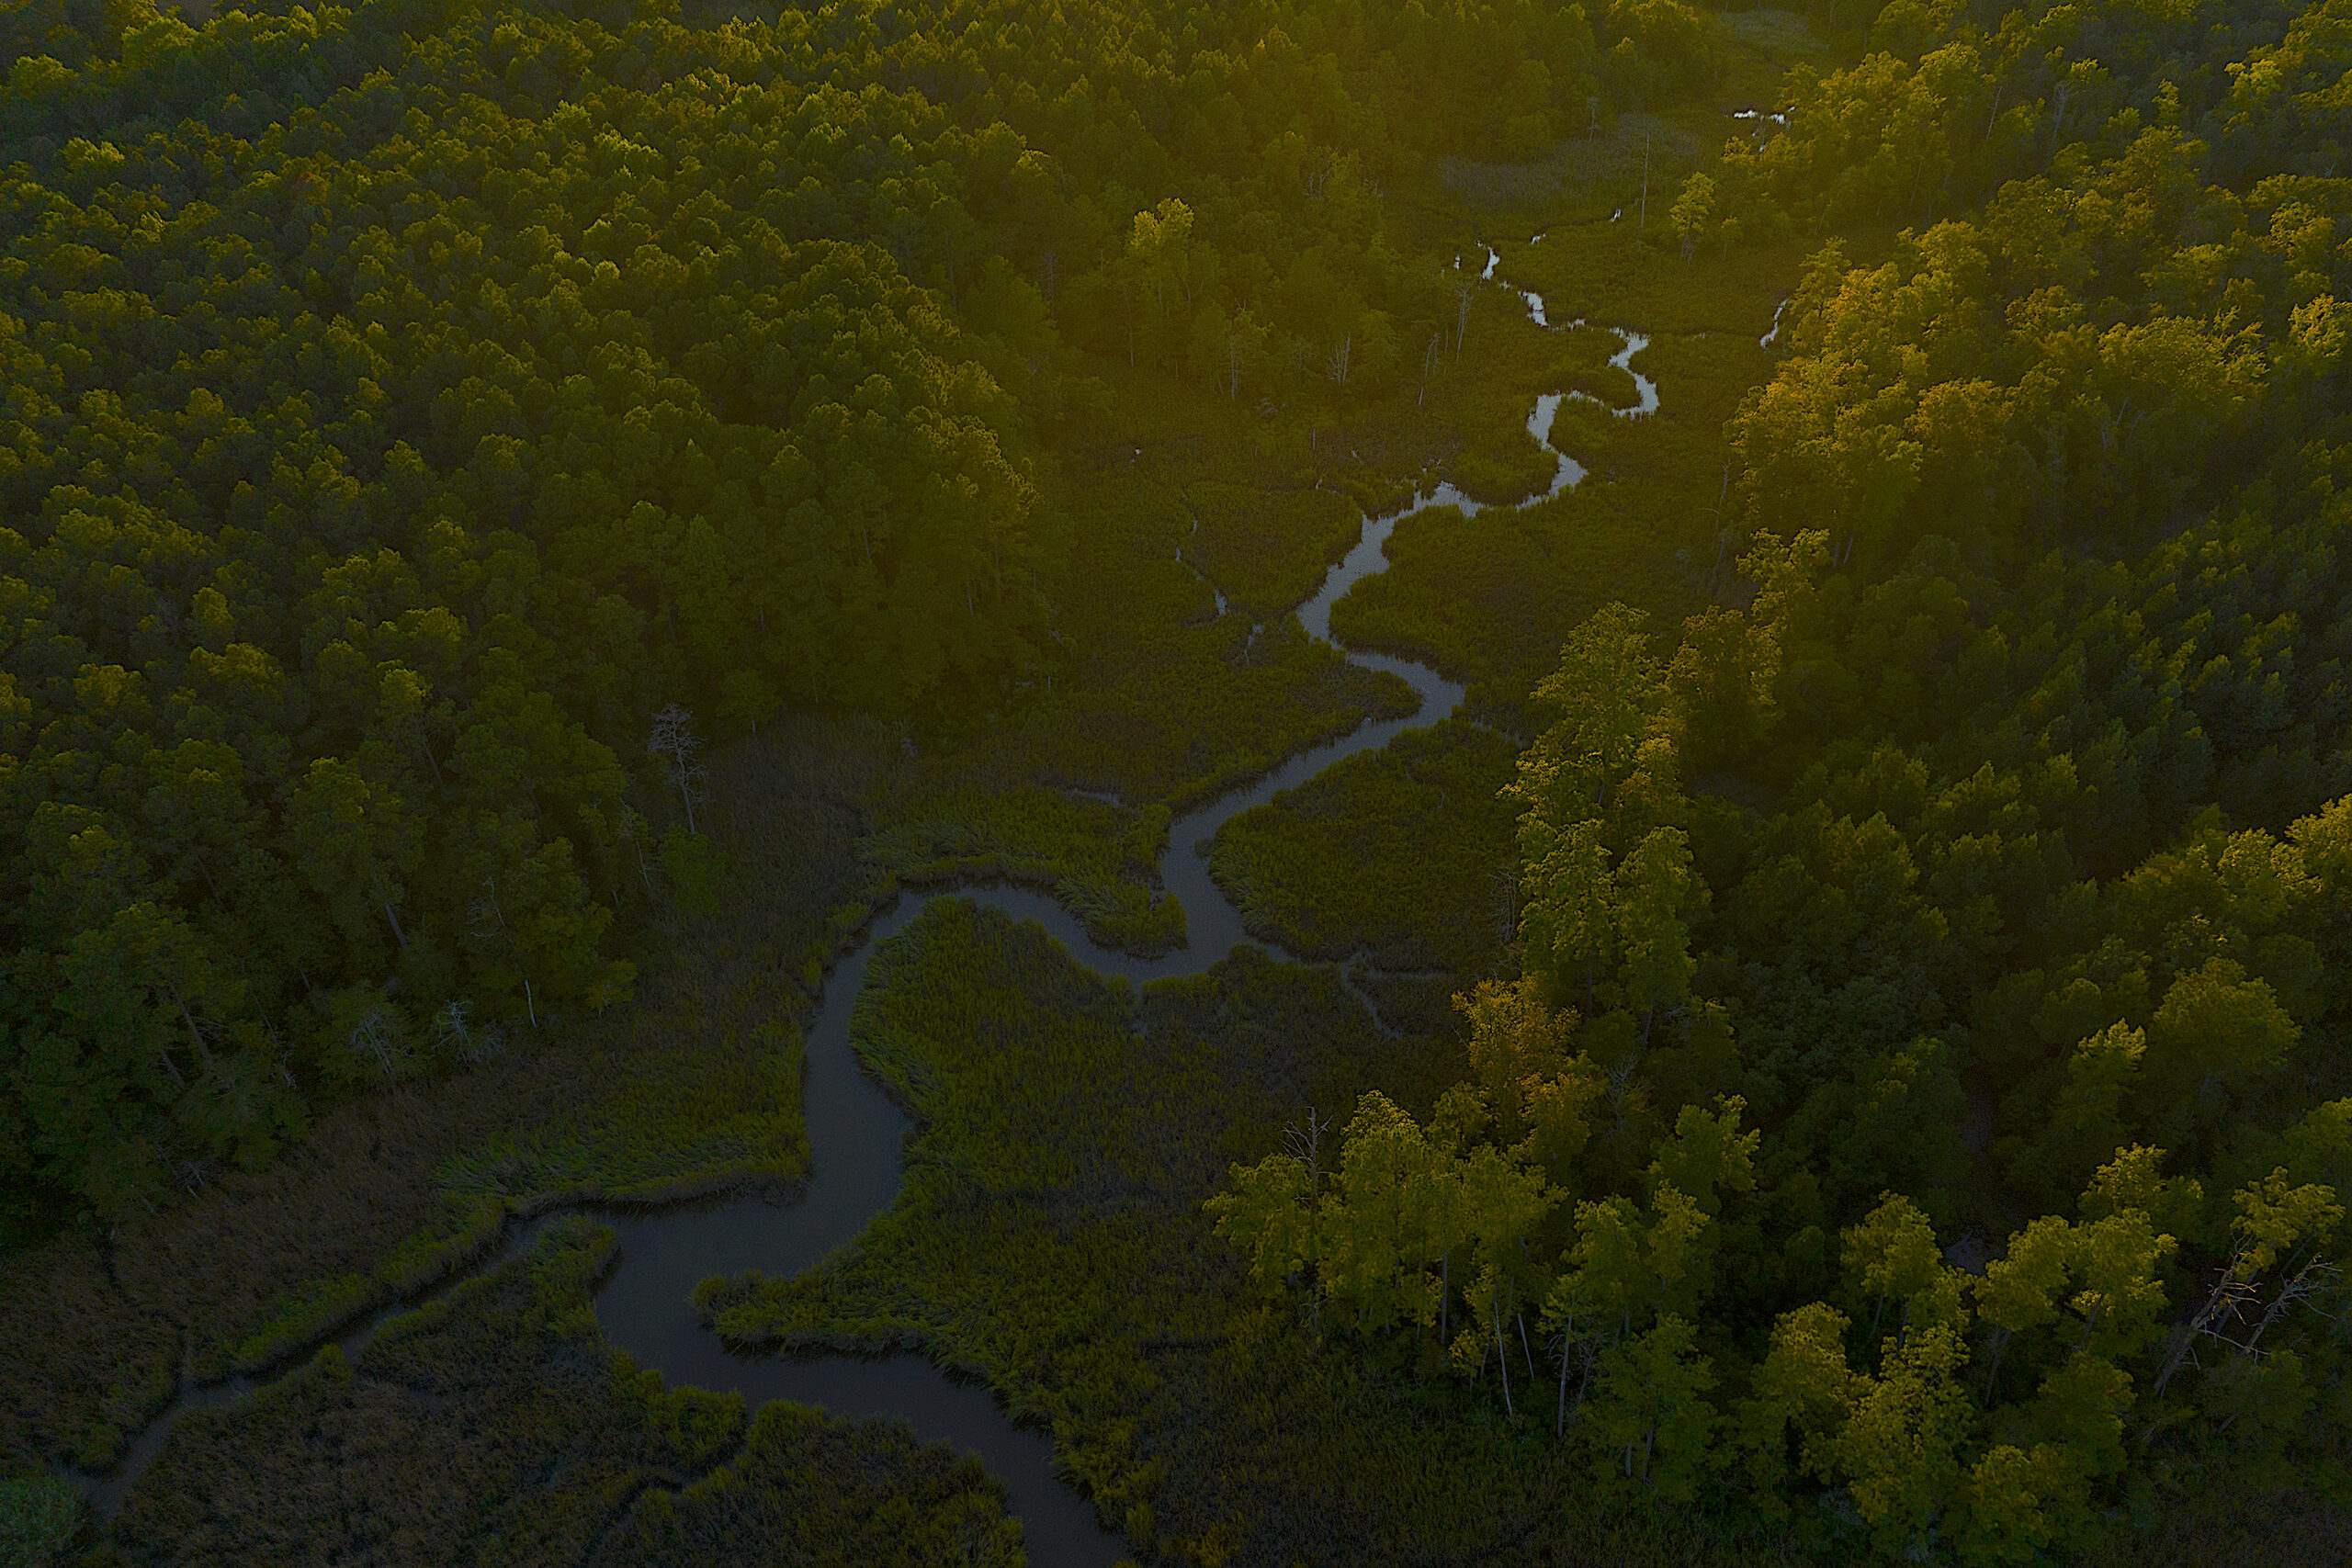 image: overhead view of river basin.